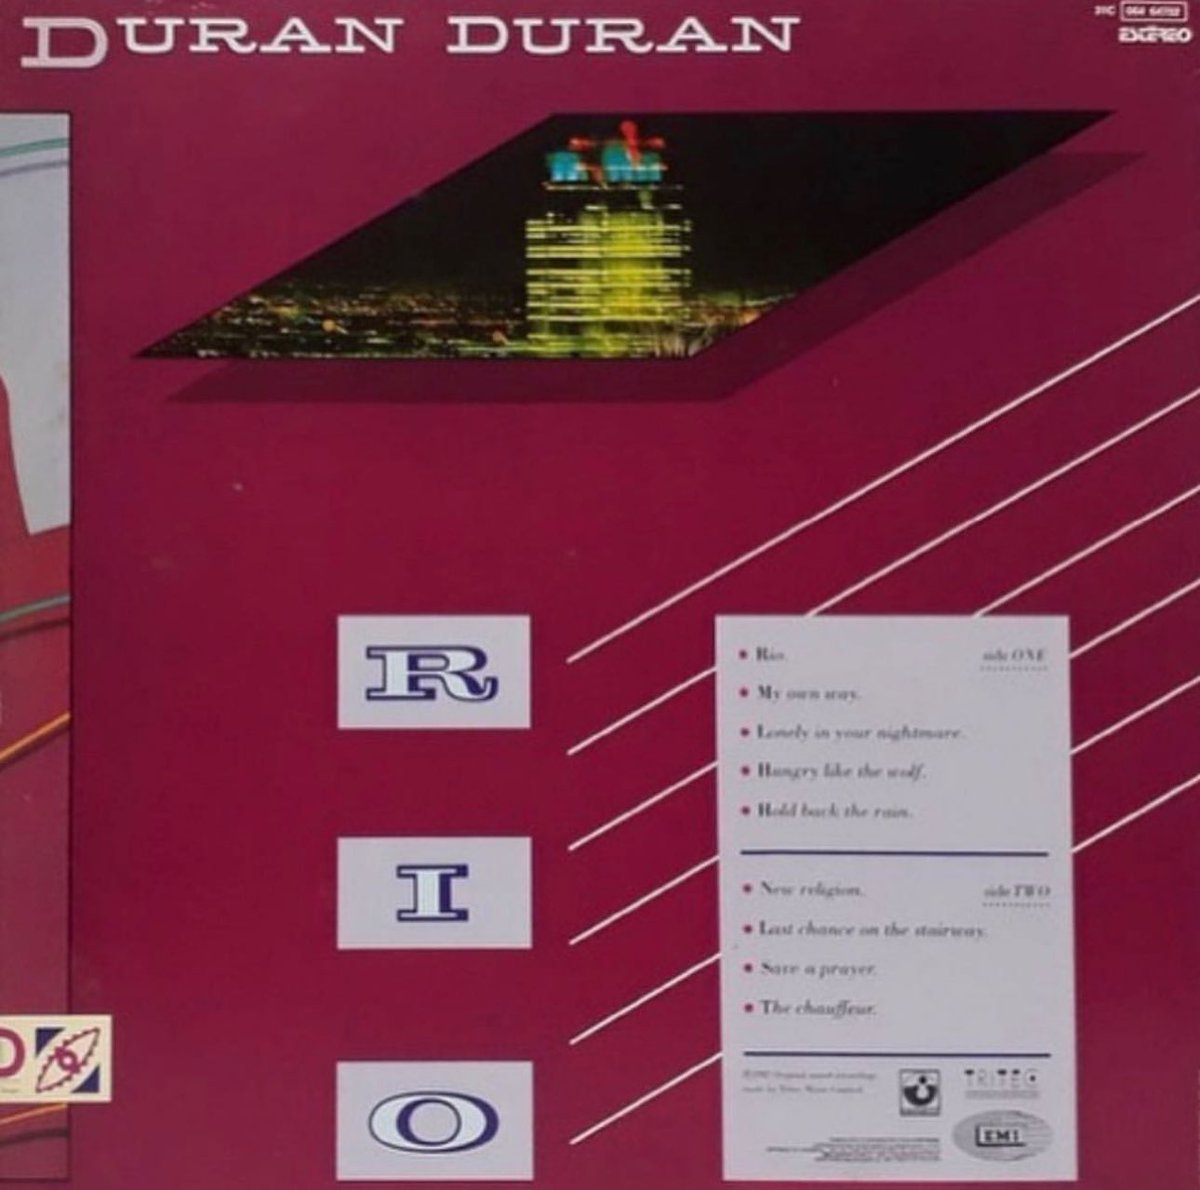 Released in the UK on this day in 1982, ‘Rio’ is the 2nd studio album by @DuranDuran. Featuring “Hold Back The Rain”, “My Own Way”, “Hungry Like The Wolf”, “New Religion”, and the title track, it peaked at #2 in the UK and #1 in Australia. Happy 42nd anniversary!